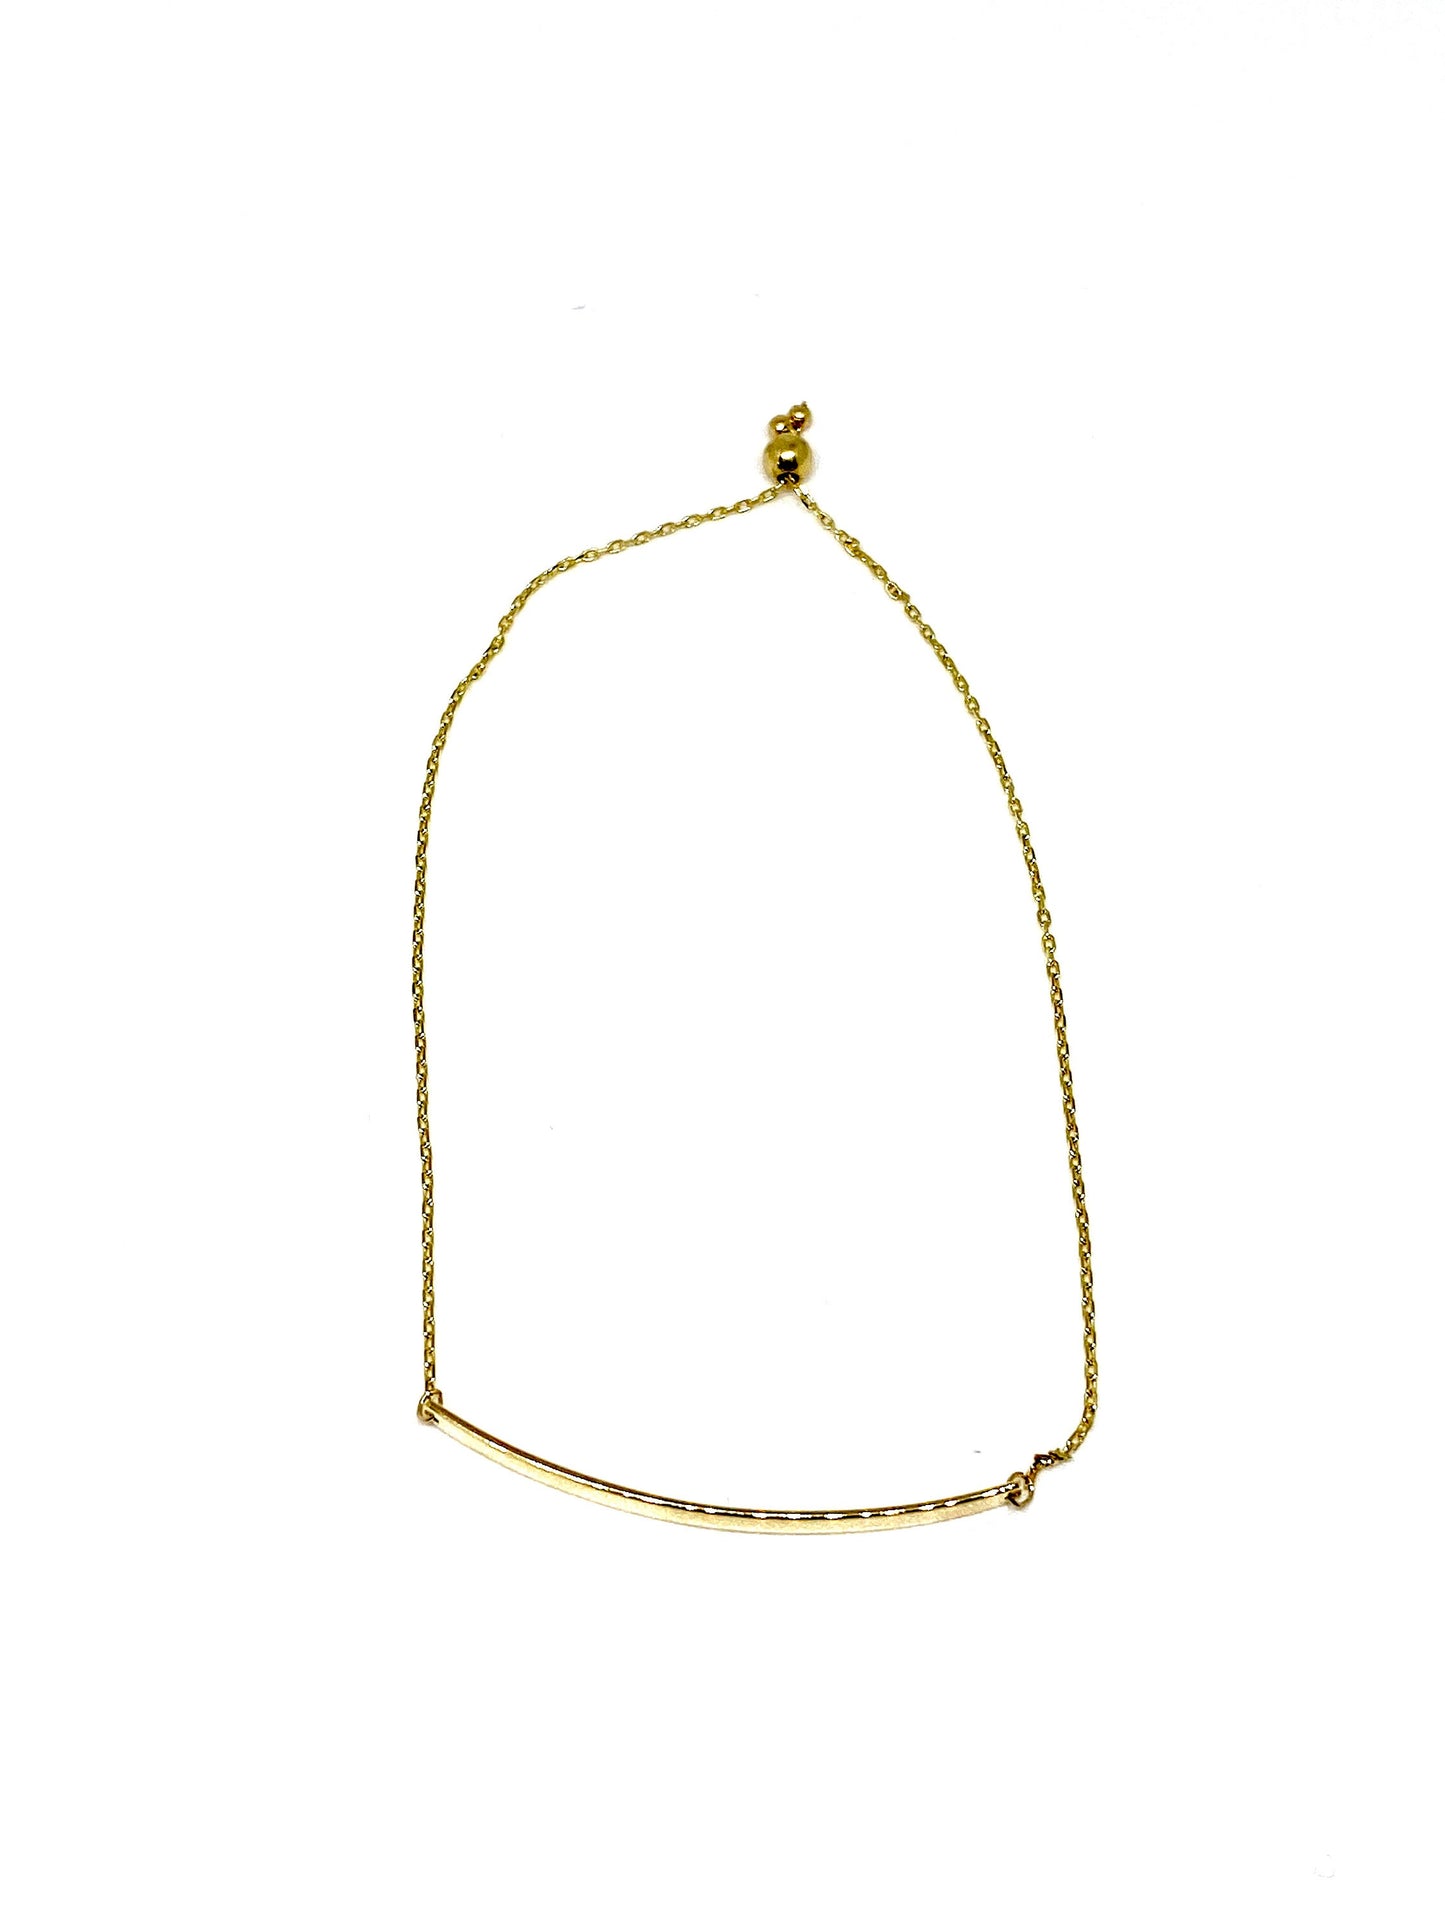 Yellow Gold Curved Bar Adjustable Bolo Chain Bracelet